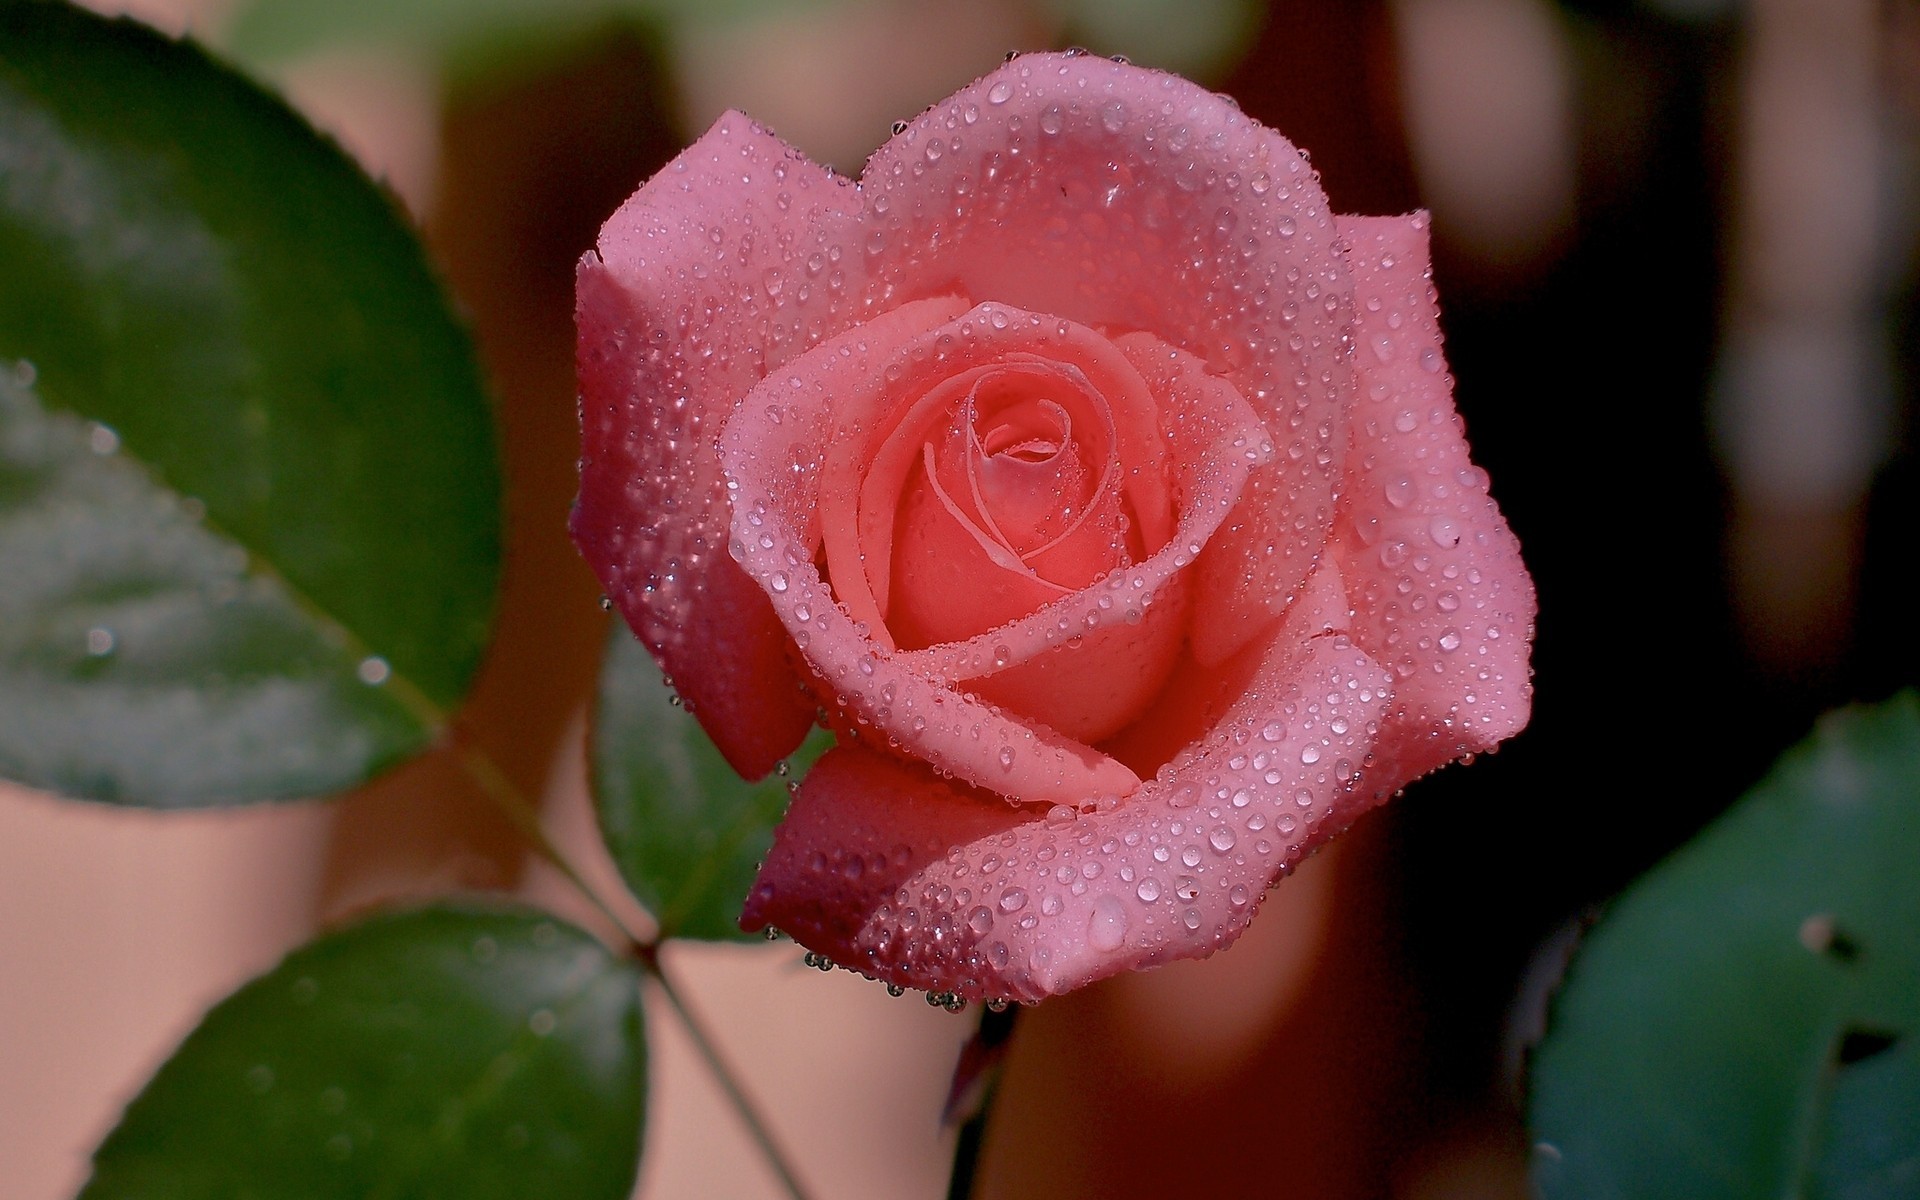 flowers, roses, drops, plants, red High Definition image